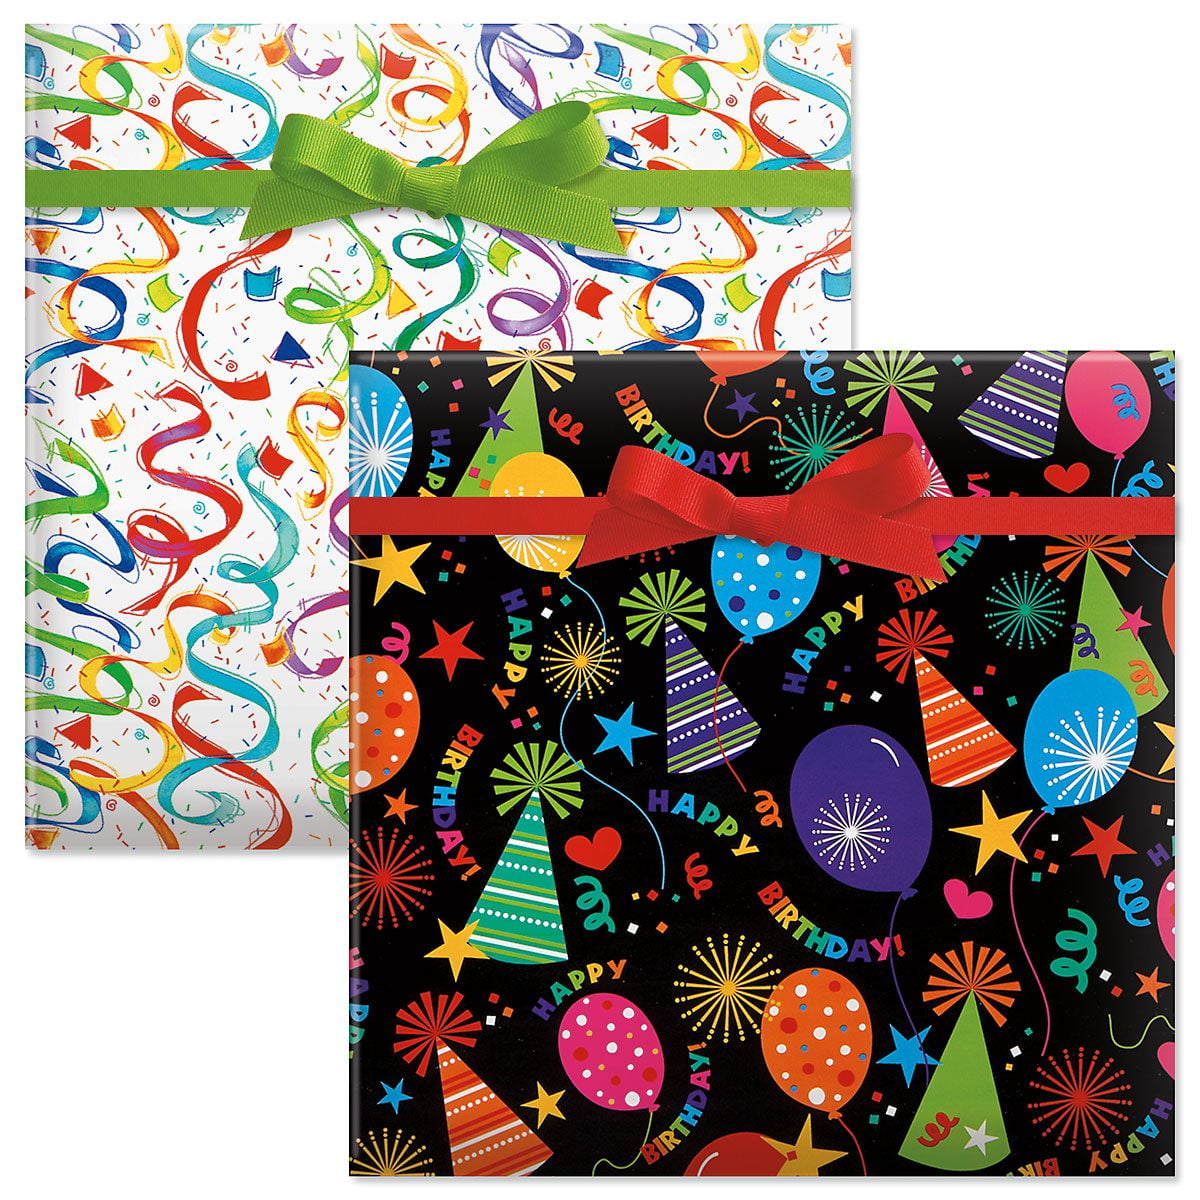 Birthday Gift Wrap Value Pack - Festive Wrapping Paper, 2 Giant